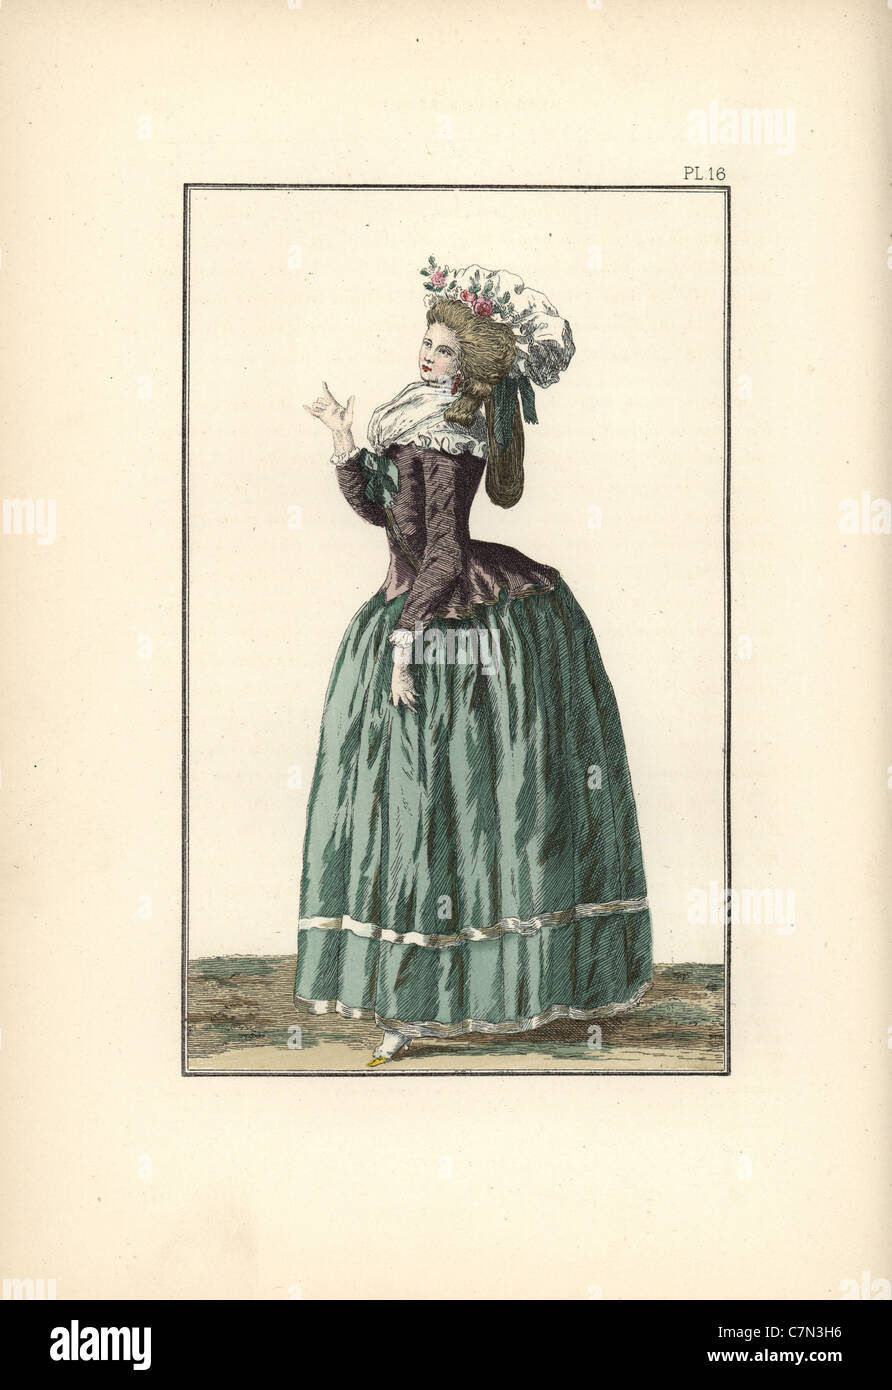 Woman in pierrot, pouf bonnet, apple green petticoat, with Jeannette ribbons on her shoes. Stock Photo